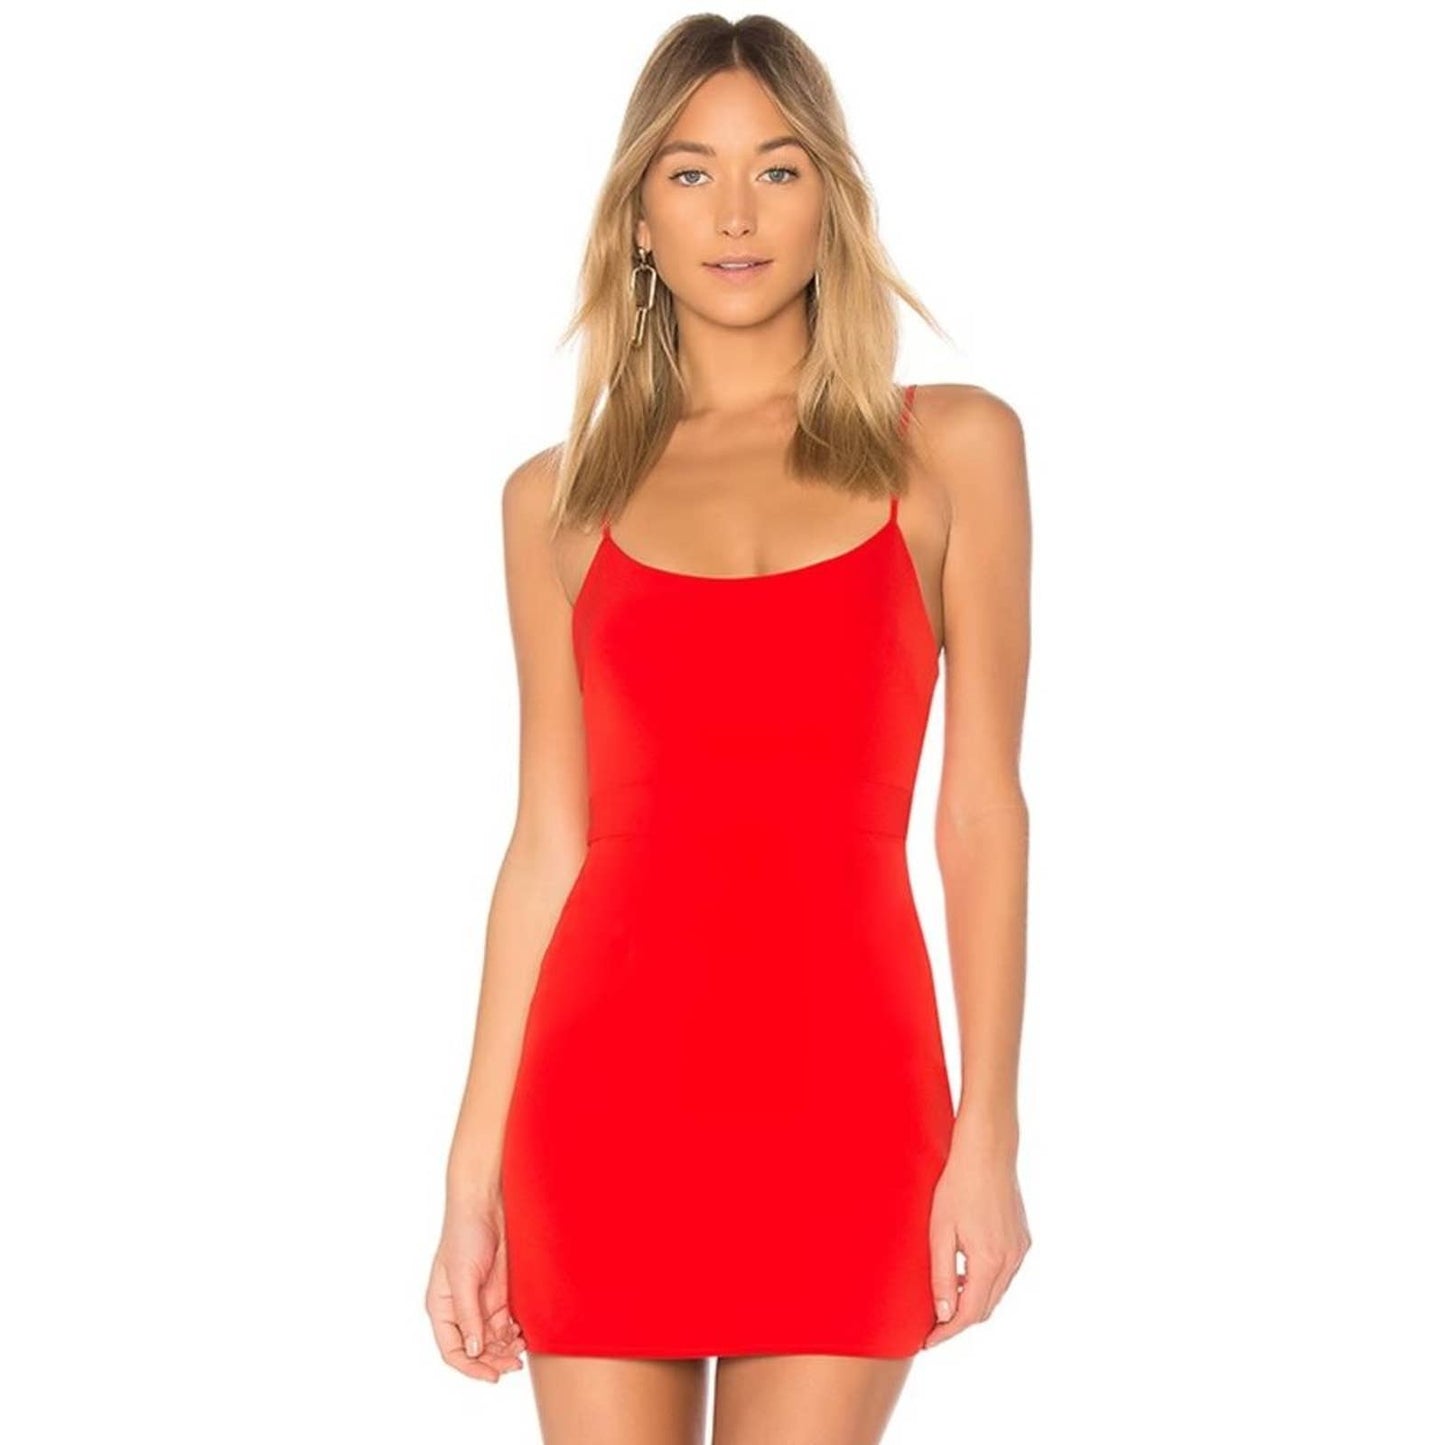 NBD Gracey Dress in Red NWT Size Small